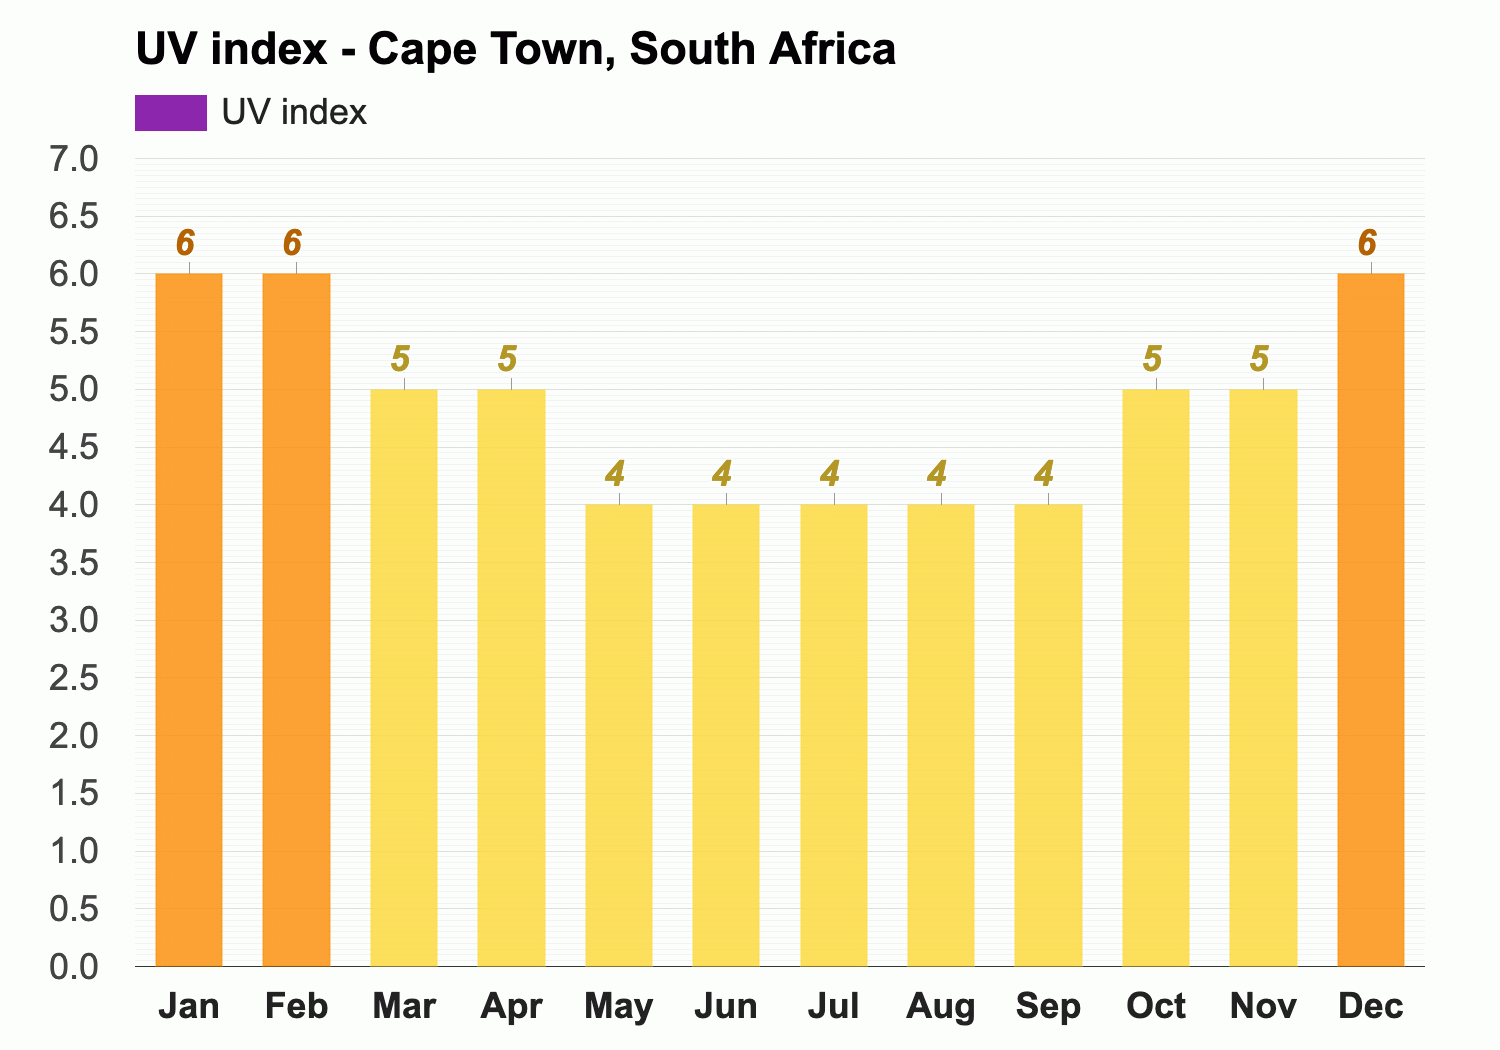 Cape Town, South Africa - May weather forecast and climate information |  Weather Atlas